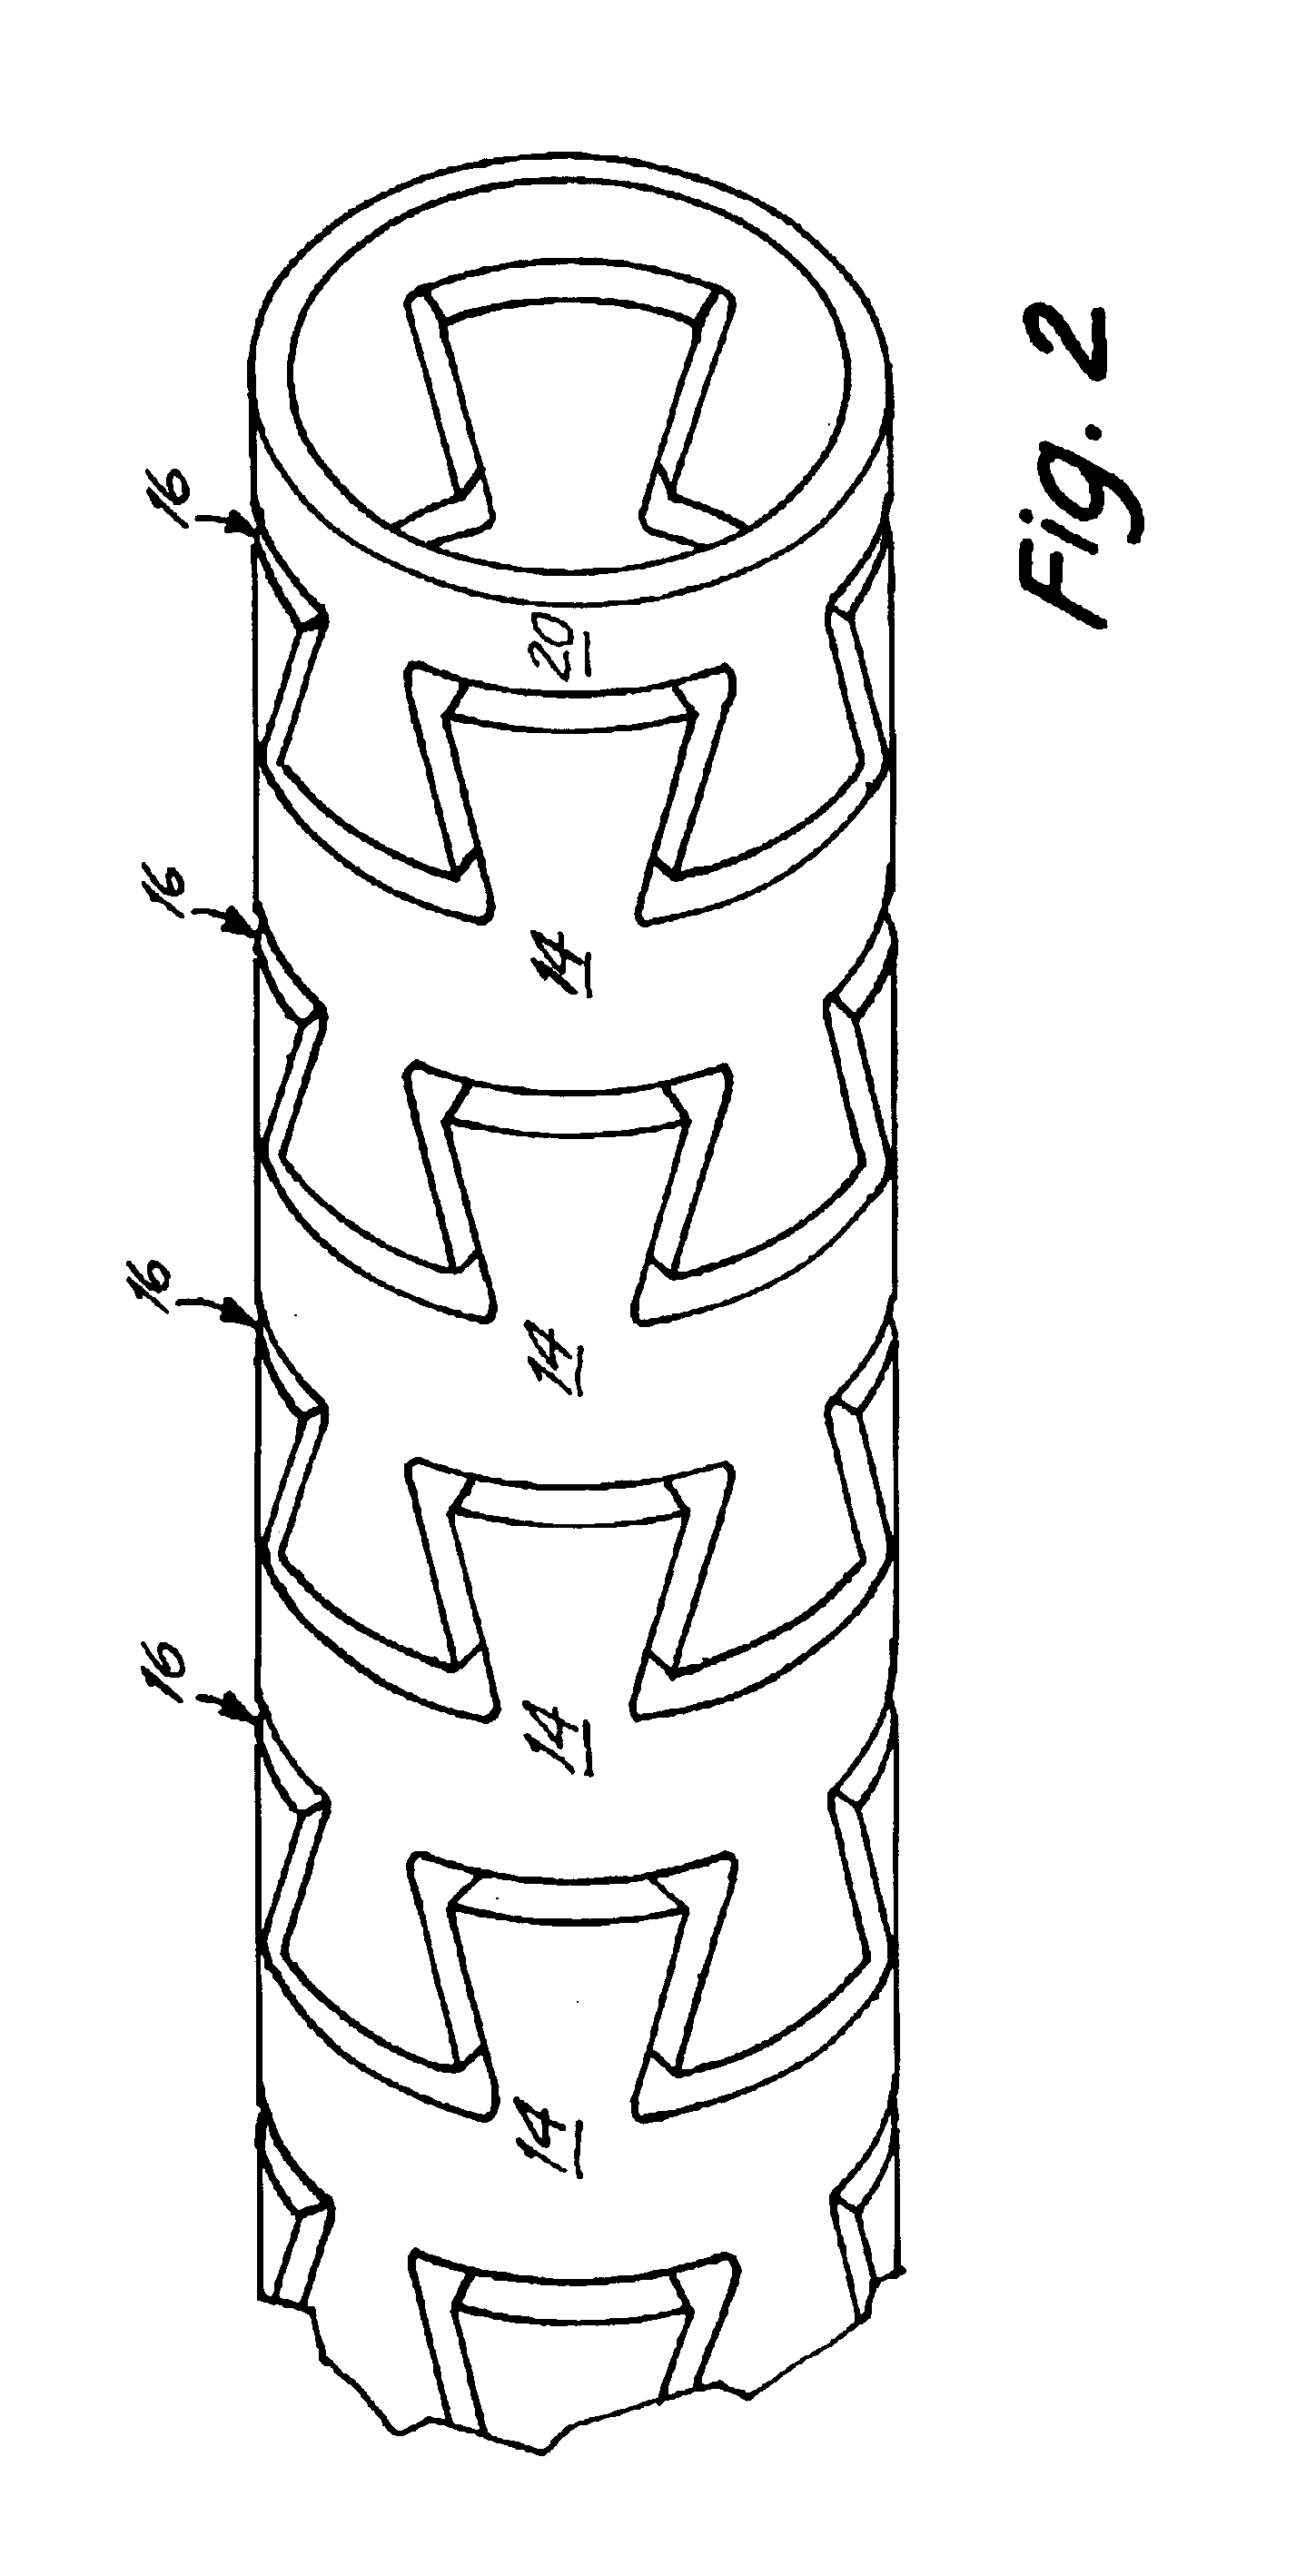 Flexible delivery device